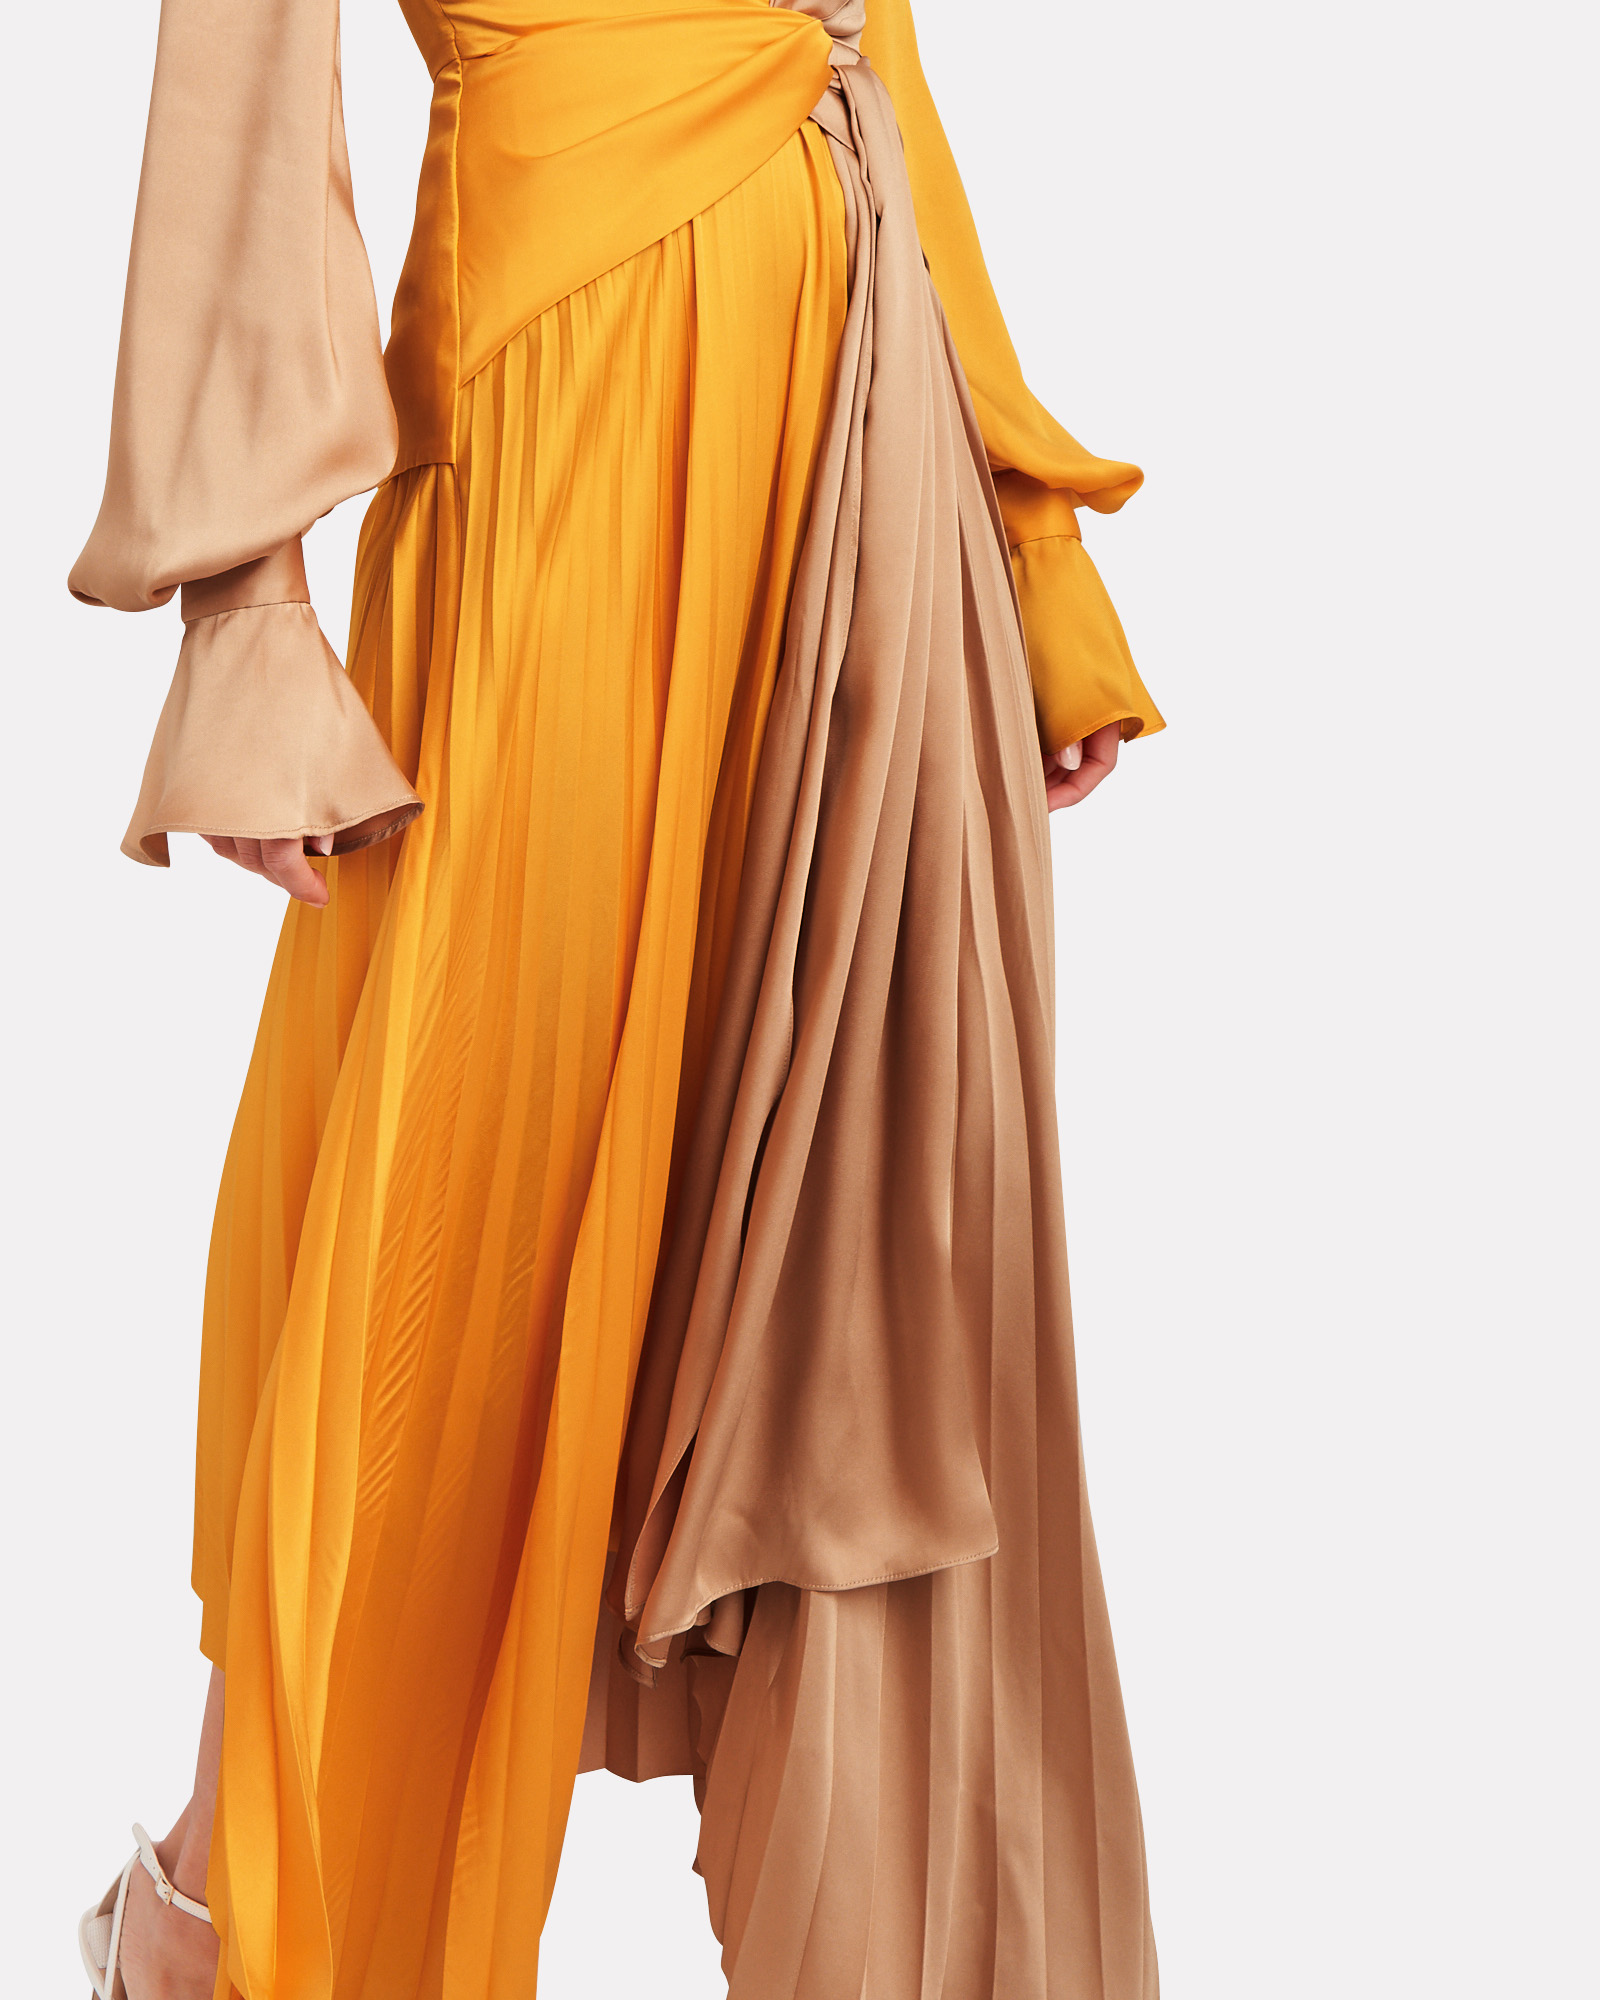 Acler | Empire Two-Tone Twisted Maxi Dress | INTERMIX®